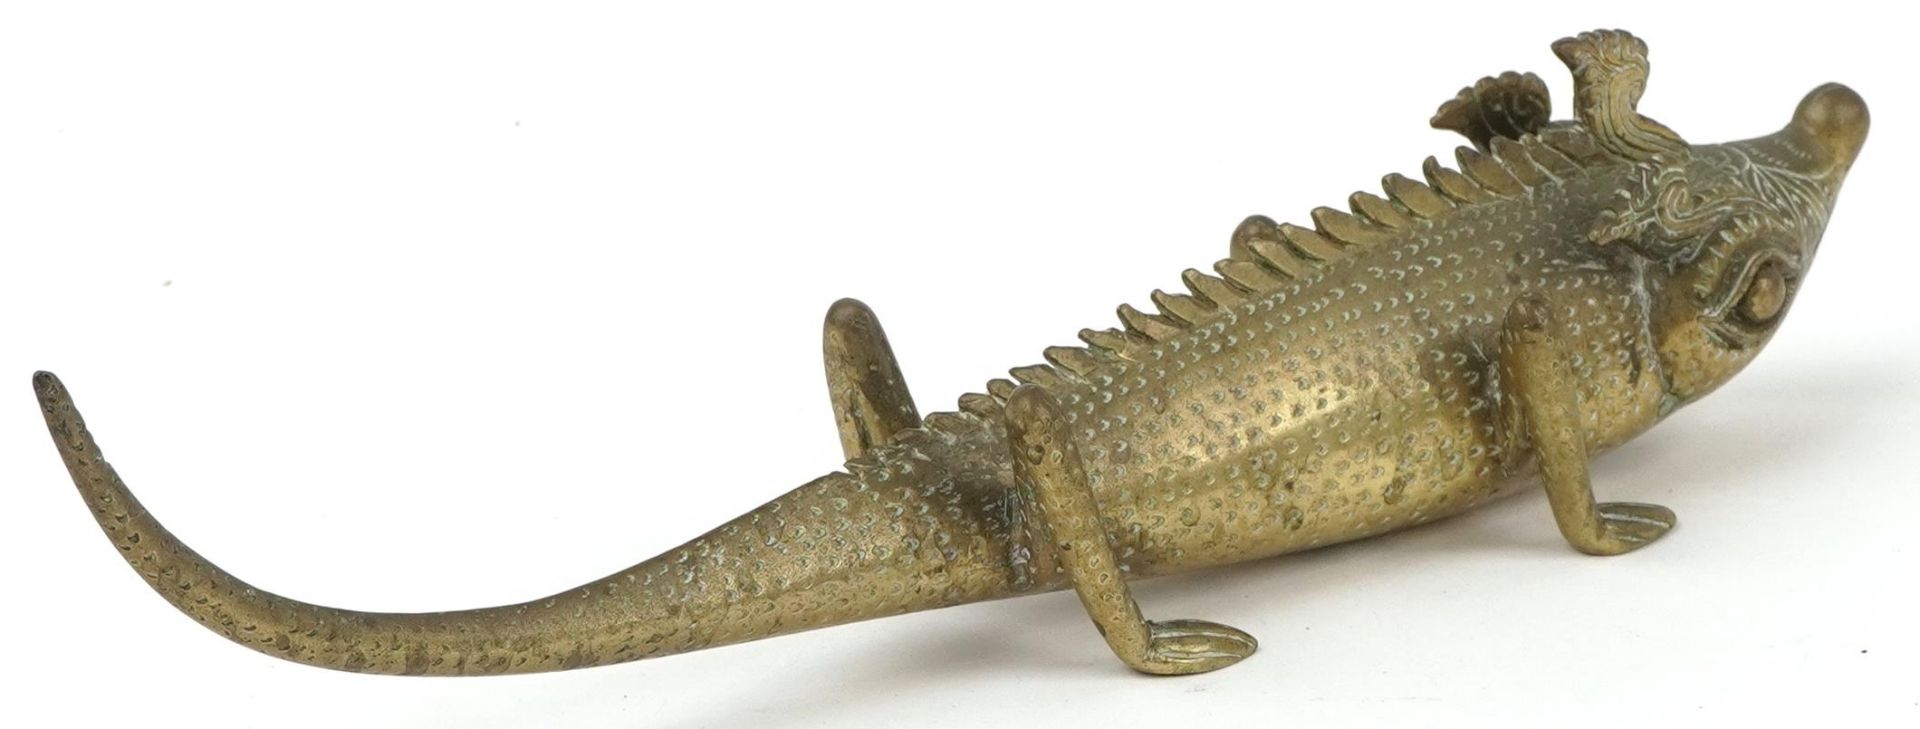 Antique Asian brass chameleon, possibly Indian, 28cm in length - Image 2 of 3